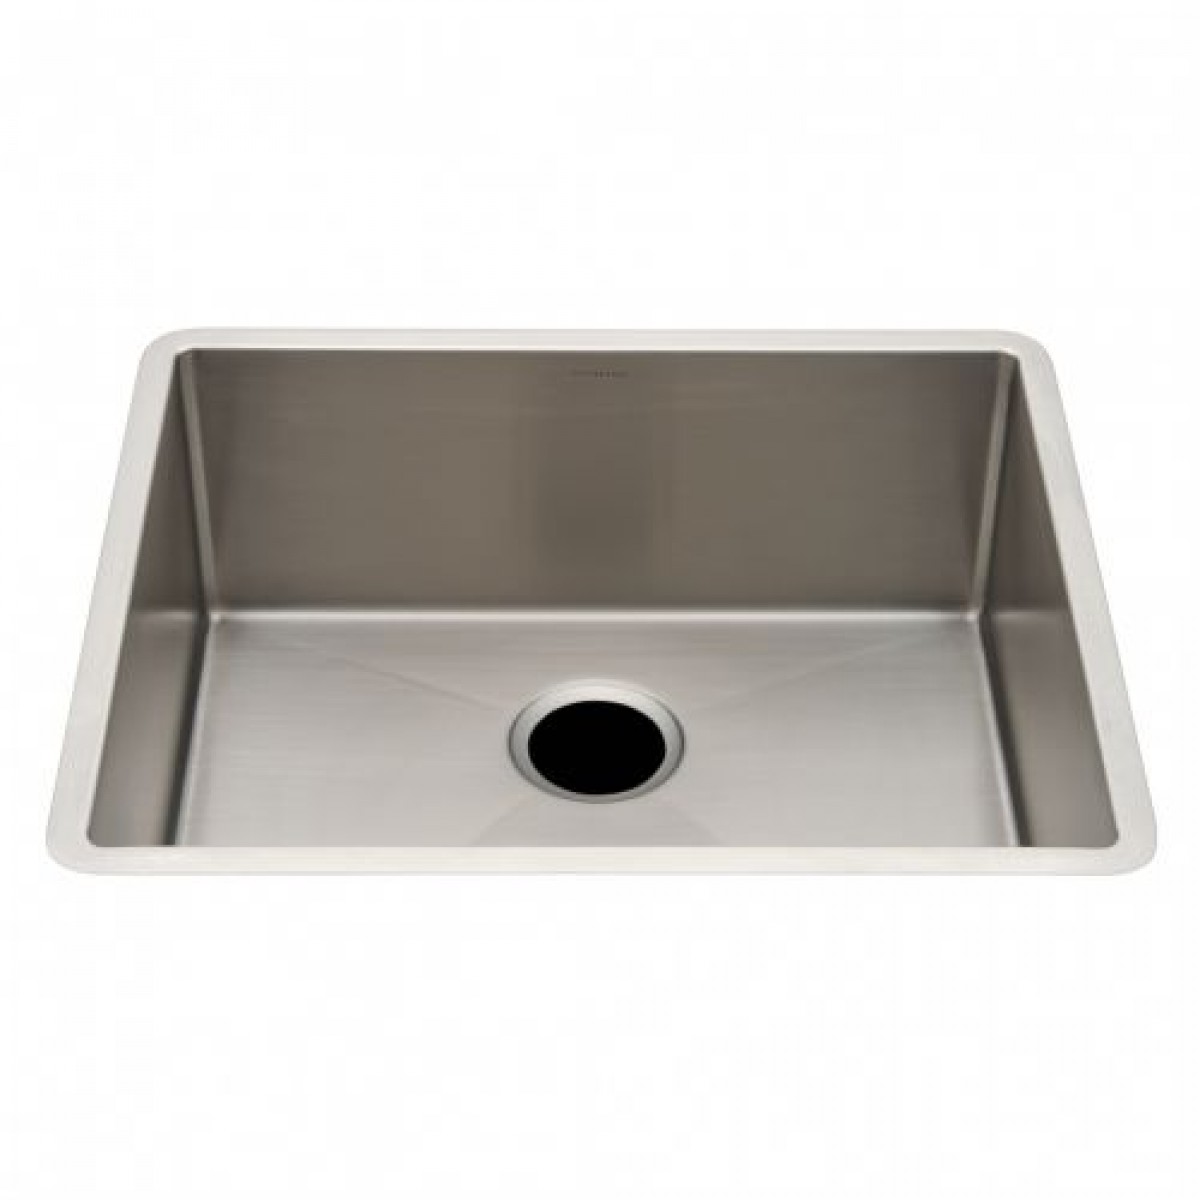 Kerr 23 1/4" x 19 3/4" x 9" Stainless Steel Kitchen Sink with Rear Drain